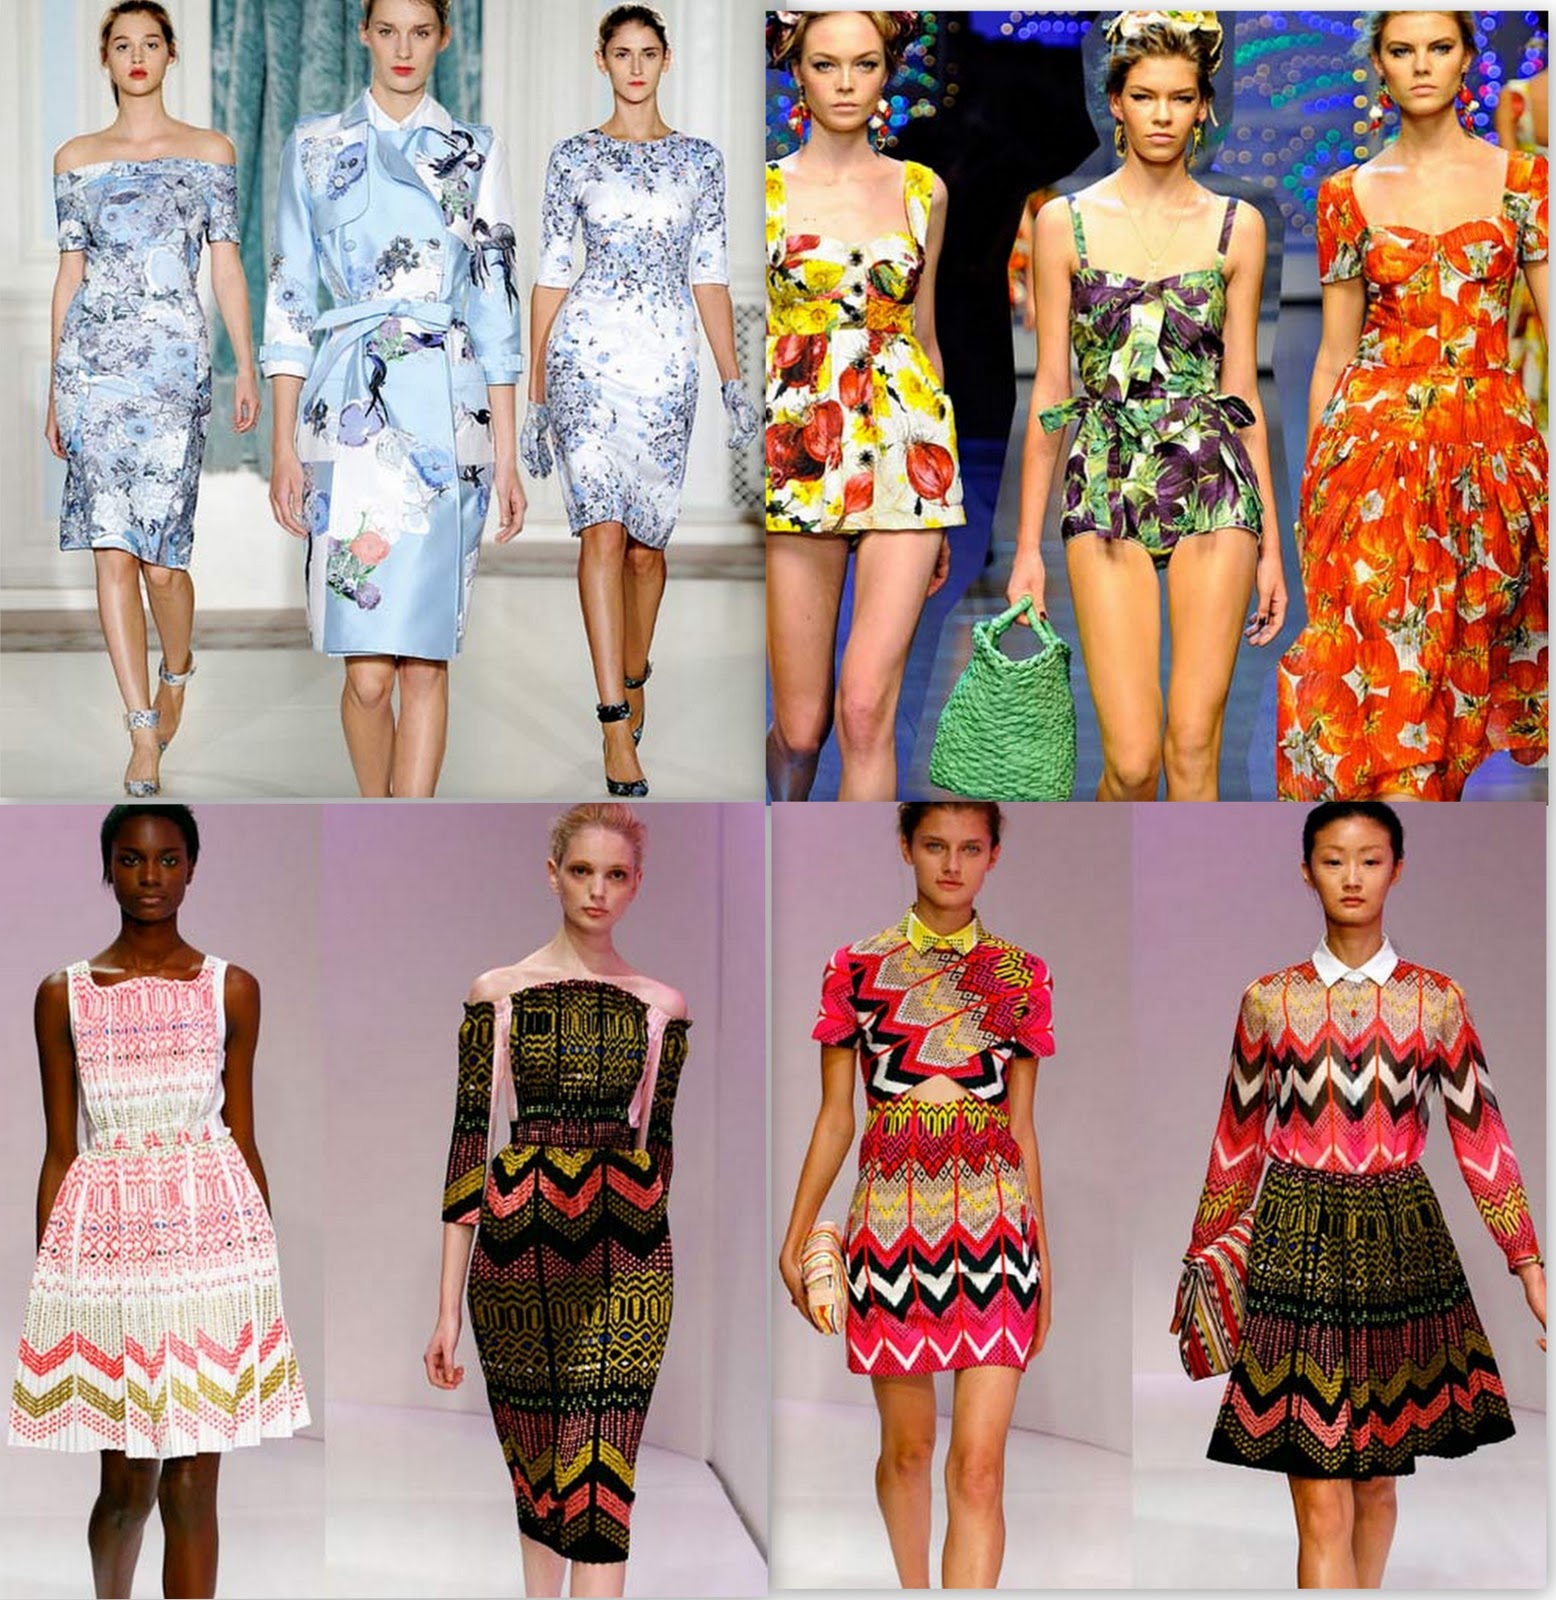 The Trend about Dresses in 2012